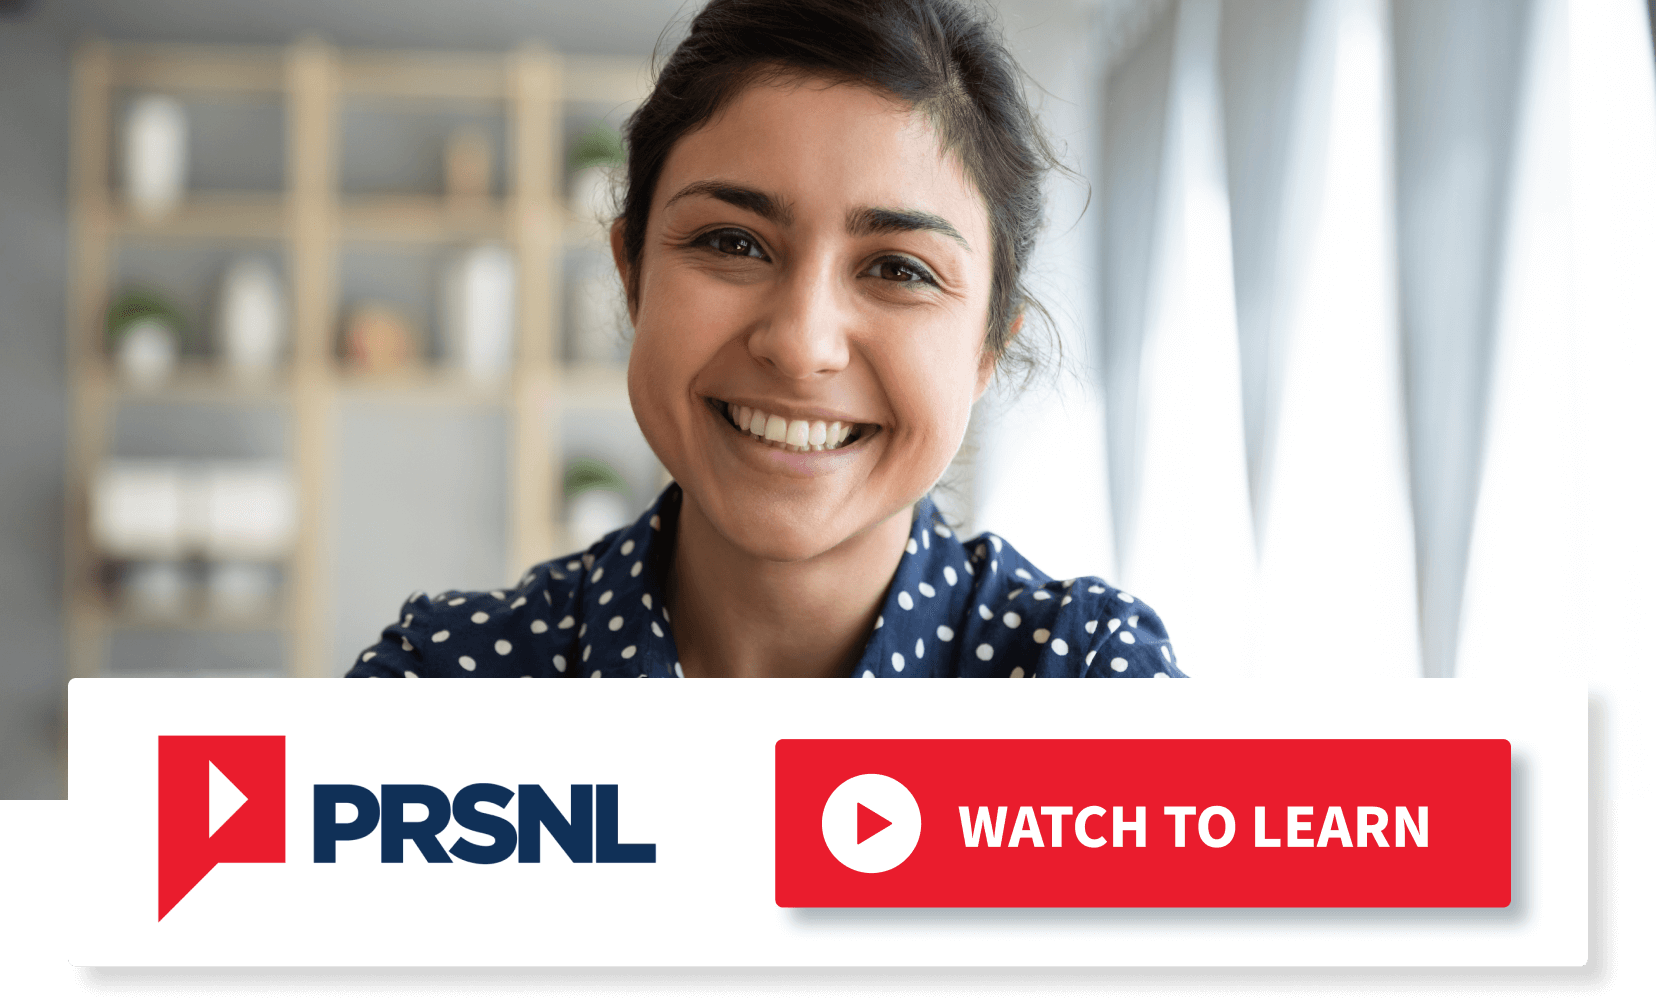 PRSNL. Watch to learn. An engaged smiling woman.